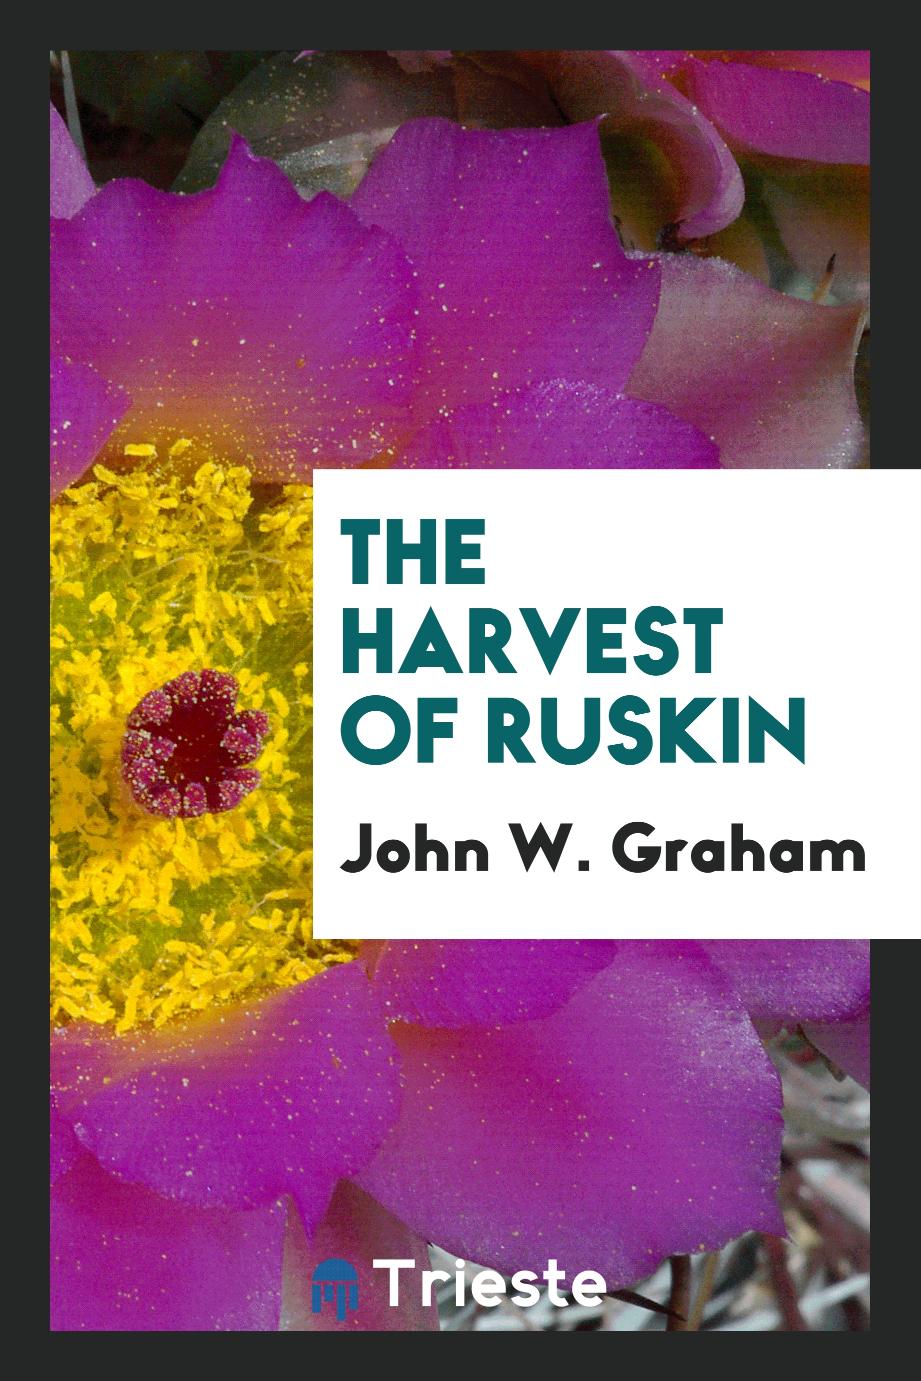 The harvest of Ruskin